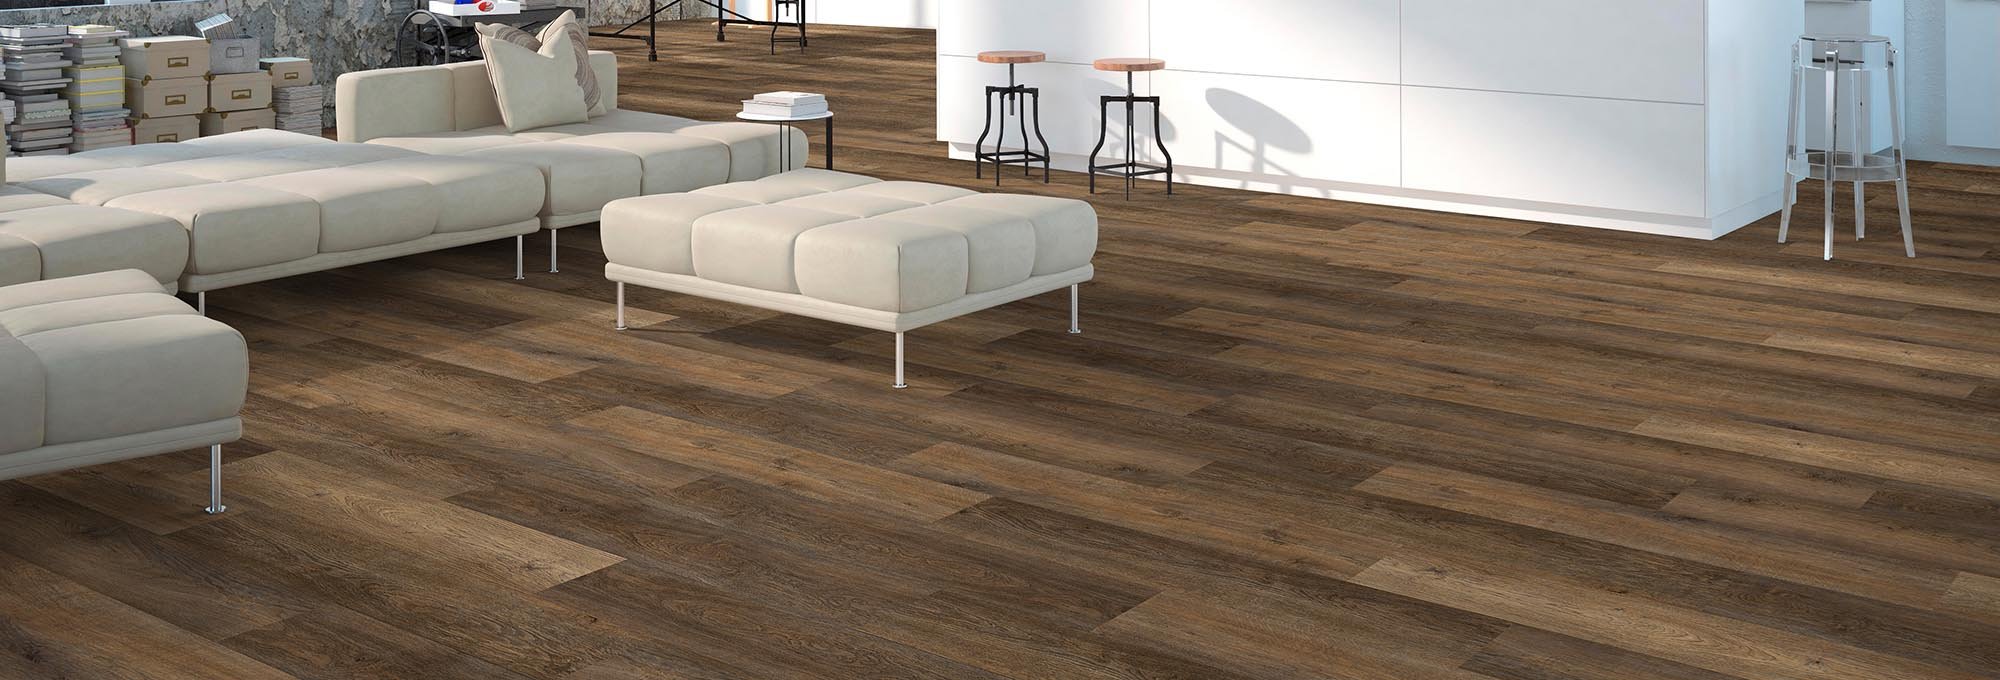 Shop Flooring Products from Mr. Carpet in Espanola, NM